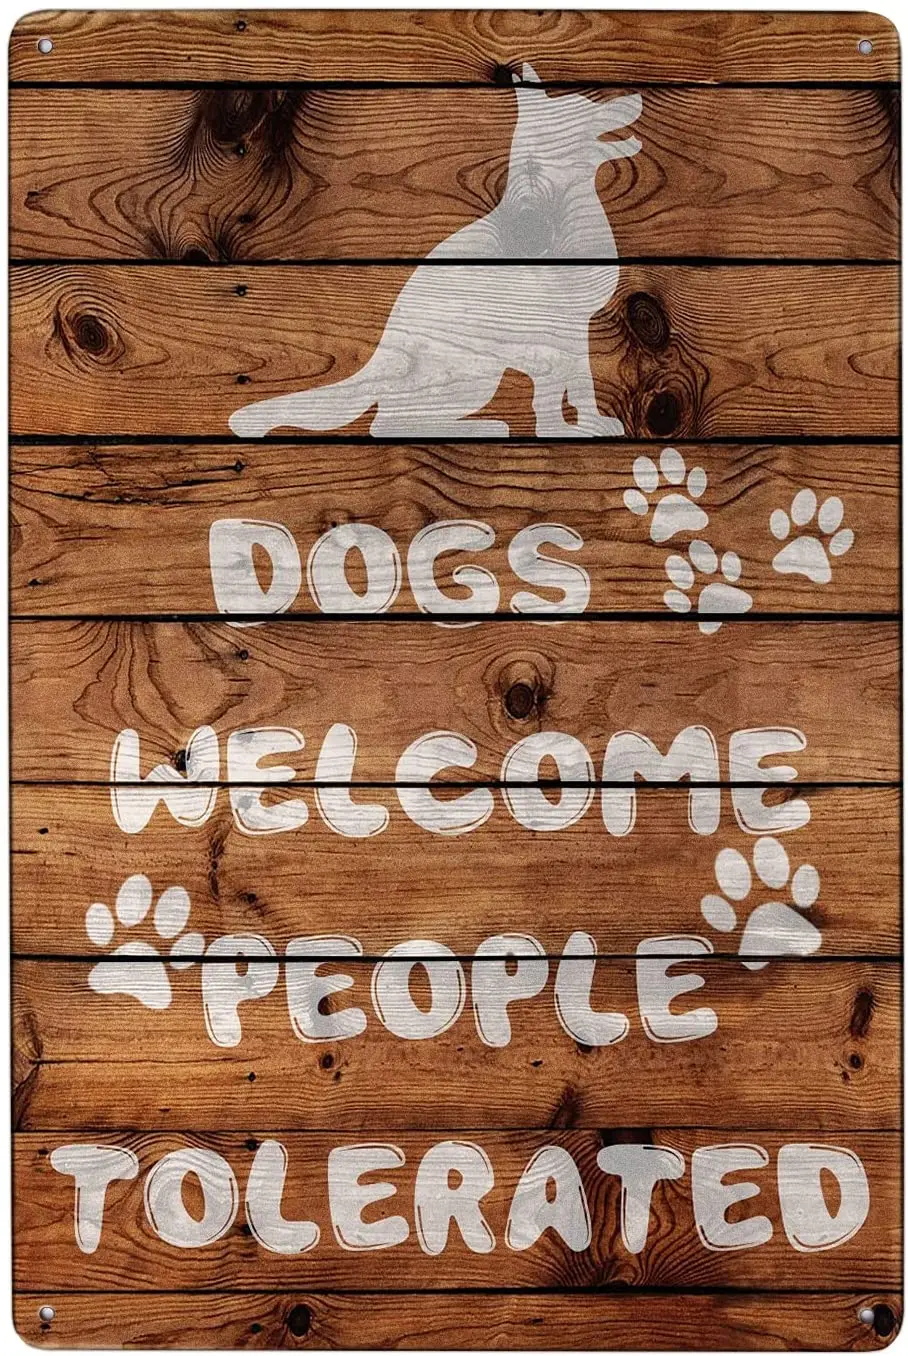 

New Retro Dogs Welcome People Tolerated Metal Tin Sign Vintage Wall Art Decor Farmhouse Dog Lovers Bedroom Bar Cafe Shop Gifts